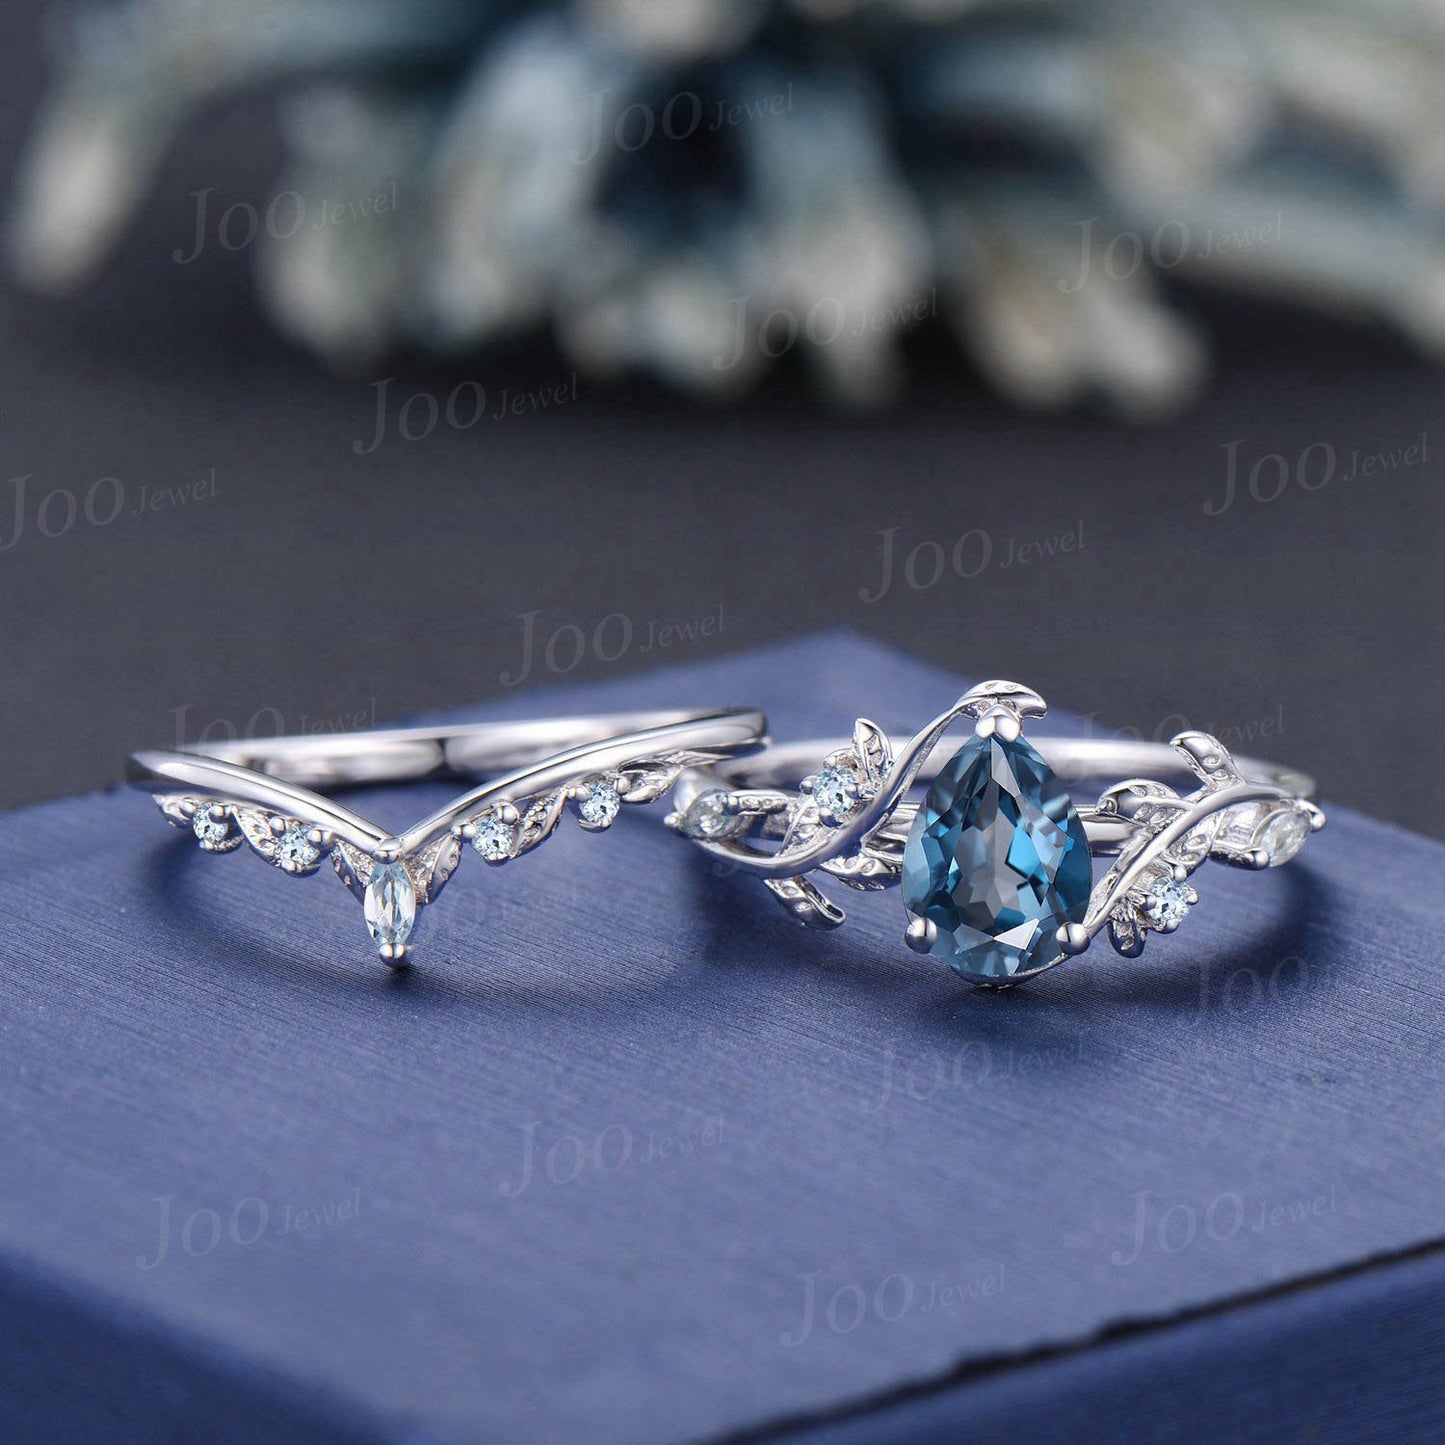 Leaf Branch Nature Inspired Pear Cut Natural London Blue Topaz Engagement Ring Set Aquamarine Wedding Ring Unique December Birthstone Gifts